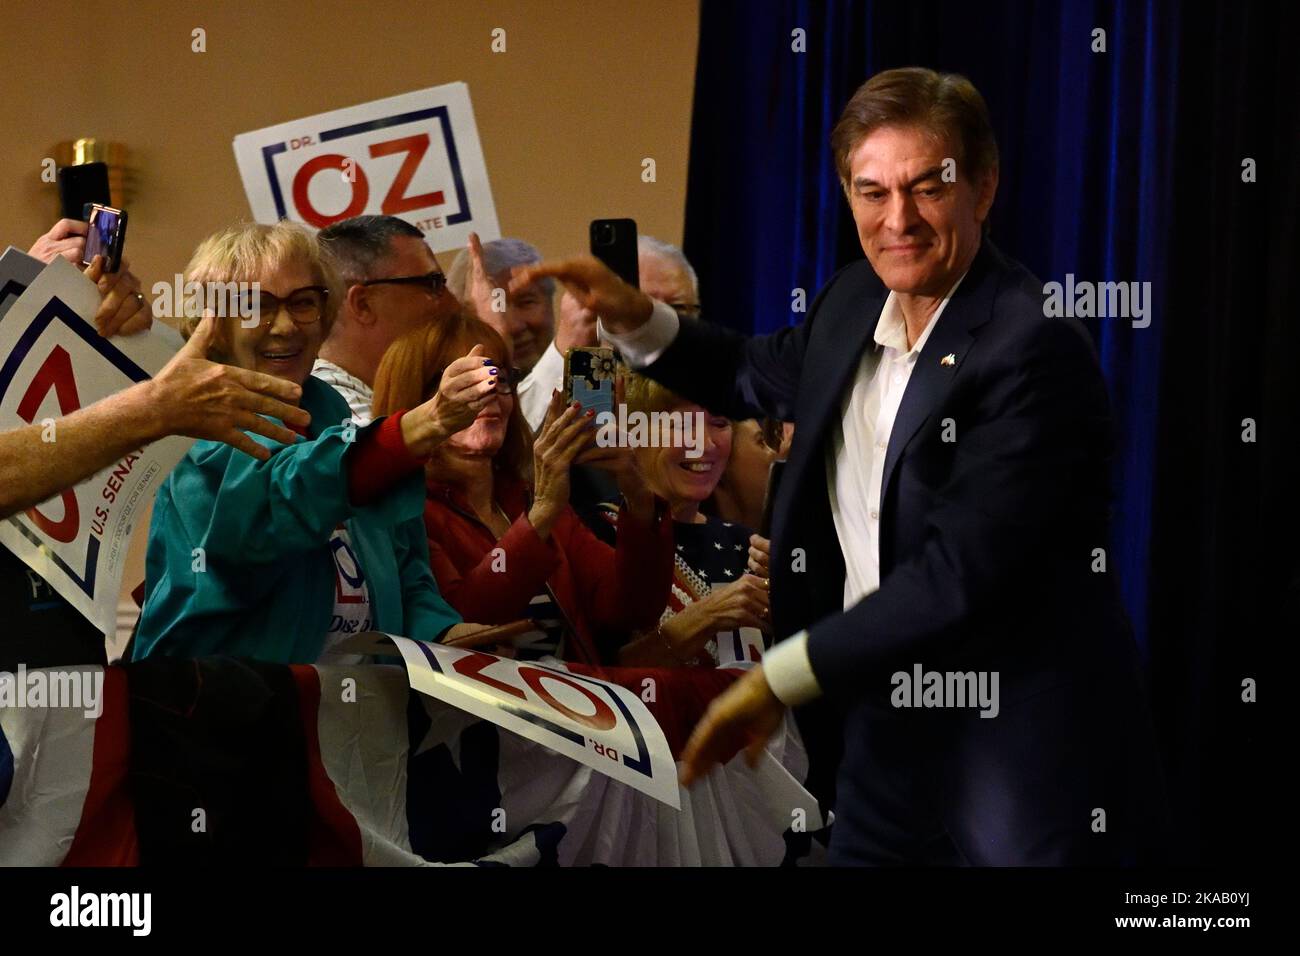 Bensalem, United States. 01st Nov, 2022. Dr. Mehmet Oz, Republican candidate for U.S. Senate holds a rally in Bensalem, PA, USA on November 1. 2022. With a week left until Election Day, Oz and his opposition, Democratic candidate PA Lt. Gov. John Fetterman, hold rallies around the Keystone State to find support for their campaigns in a thigh and closed-watched race of a Pennsylvania U.S. Senate seat. Credit: OOgImages/Alamy Live News Stock Photo